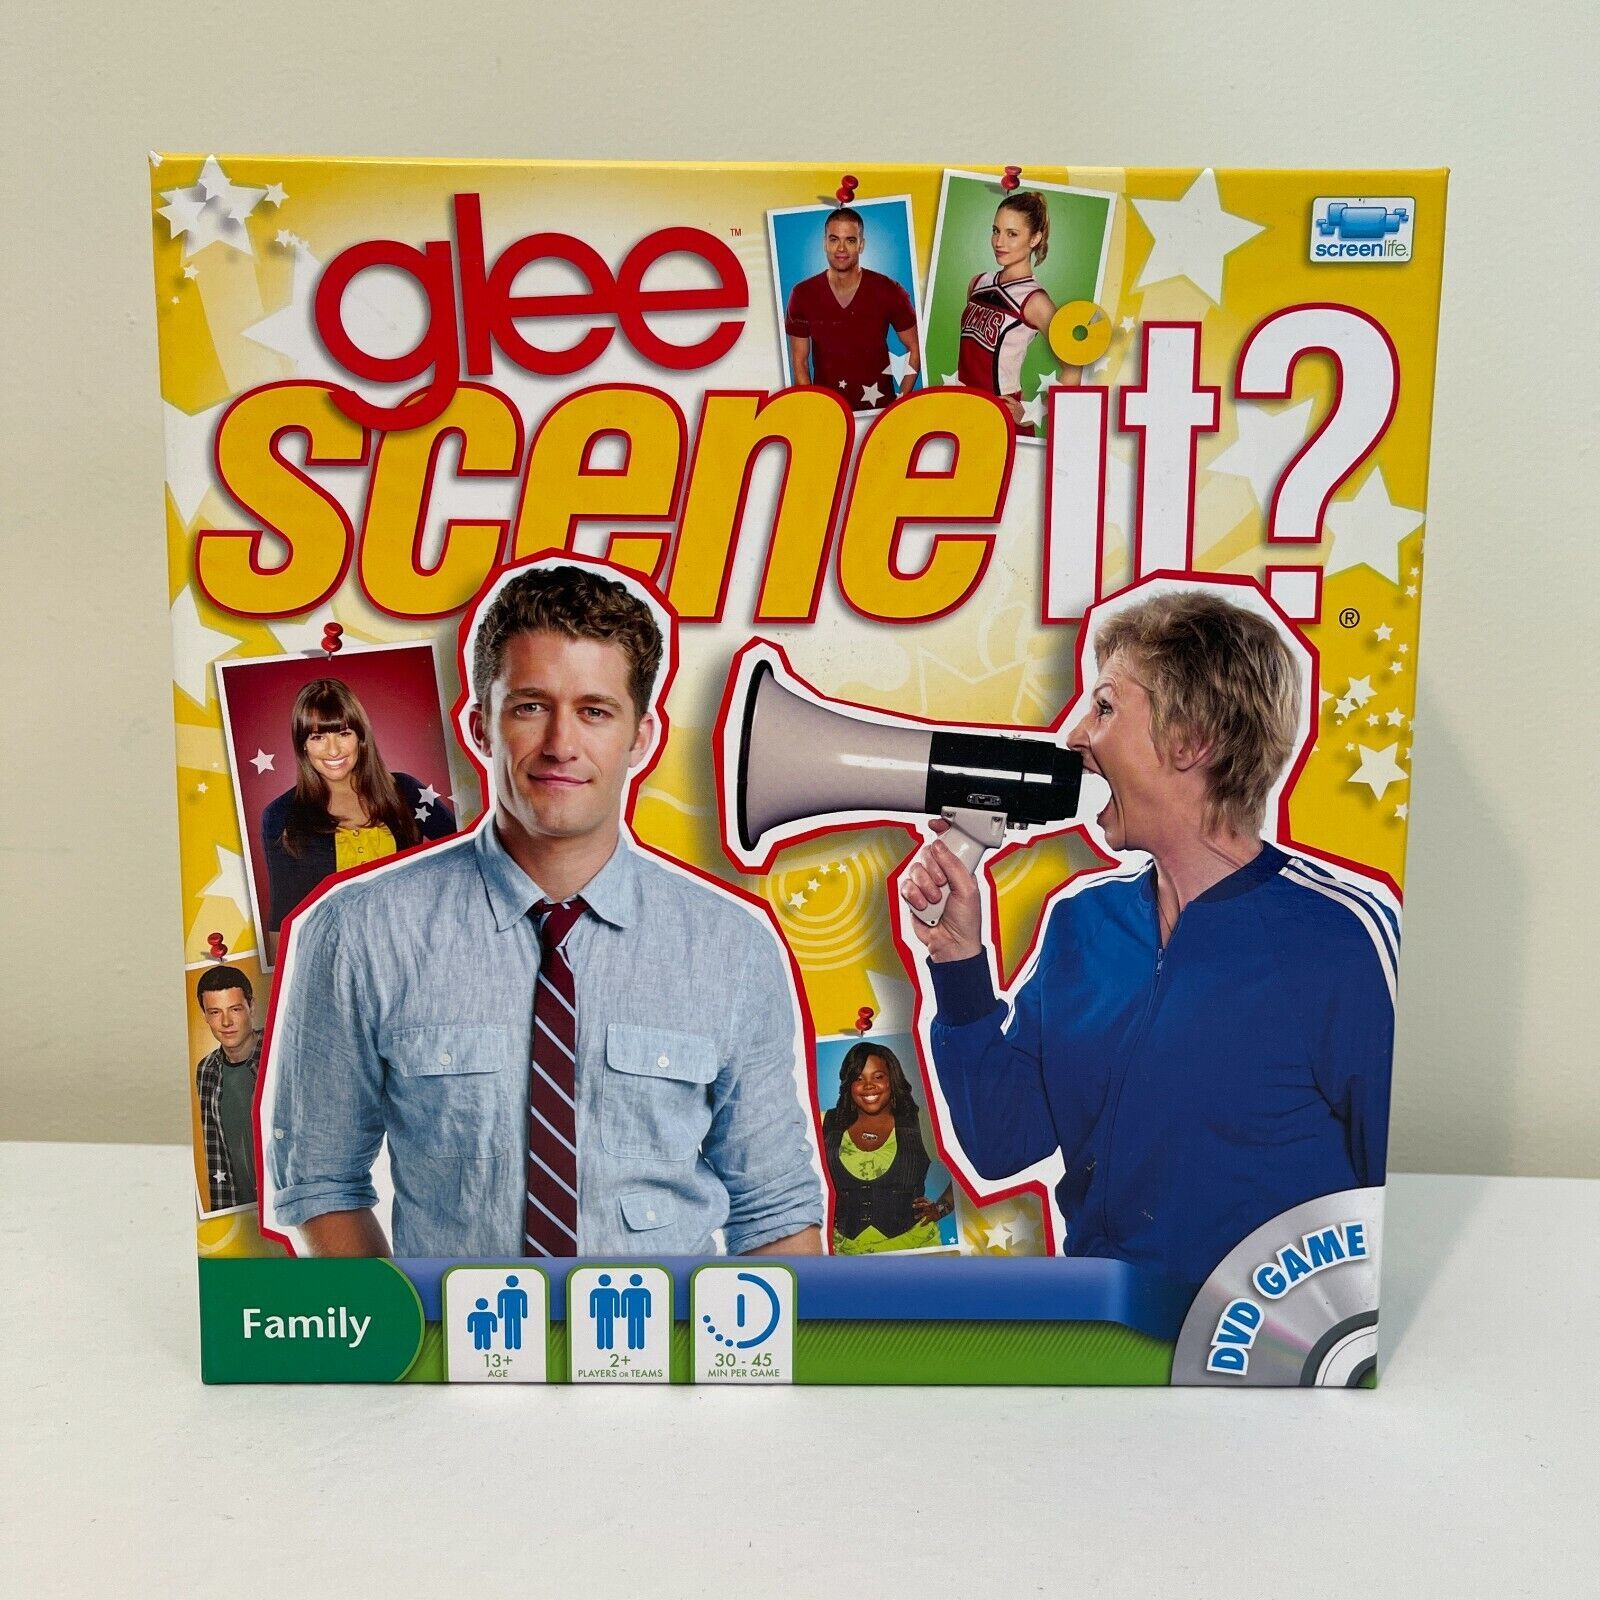 Glee Scene It? Game by Screen Life - 2011 Edition DVD GAME READ DESCRIPTION  - $23.74